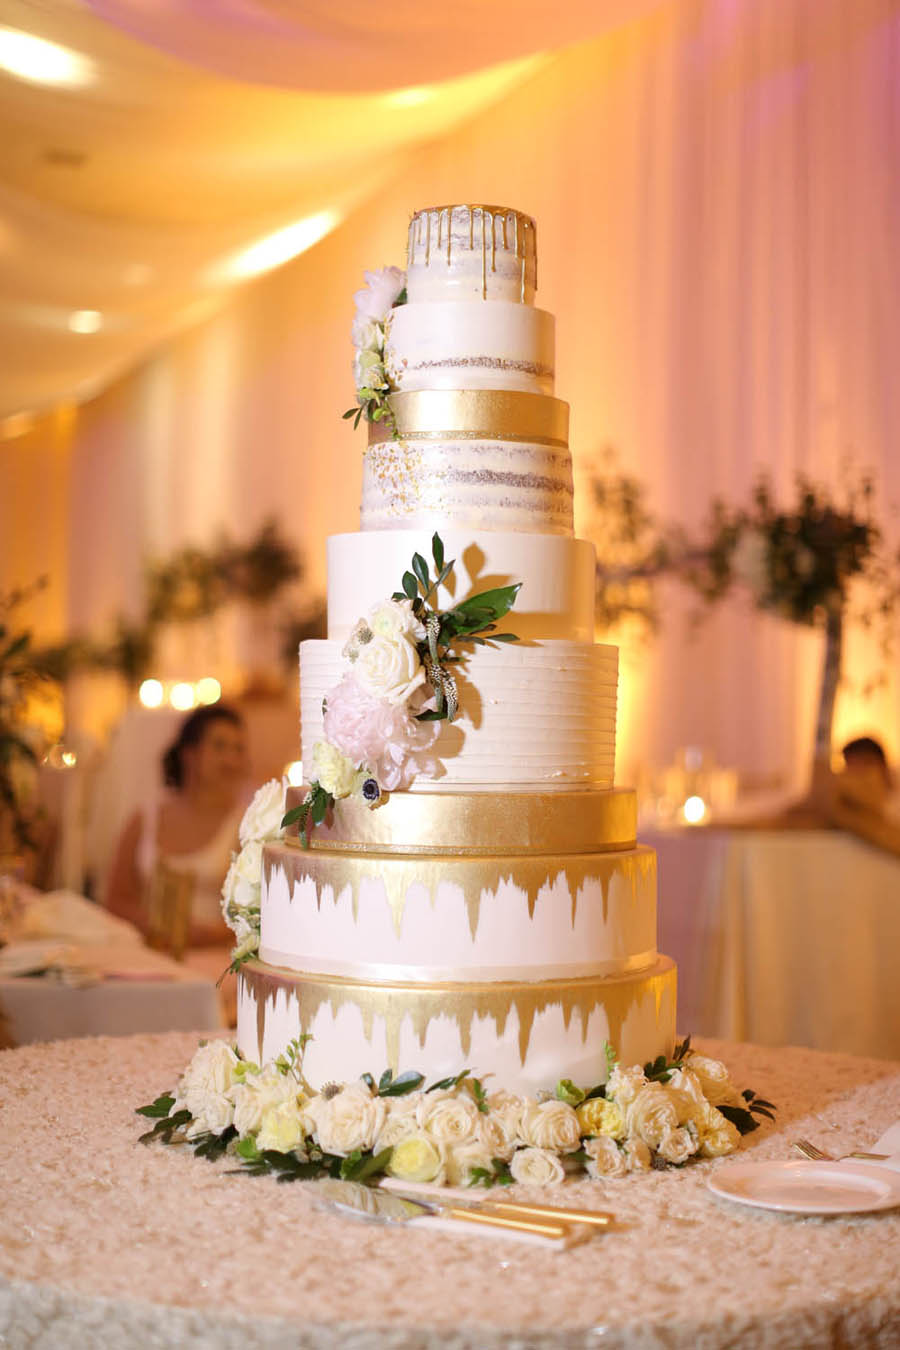 Nine Tier Round White Wedding Cake with Gold Dripping Frosting, White Florals with Greenery | Tarpon Springs Wedding Bakery Artistic Whisk